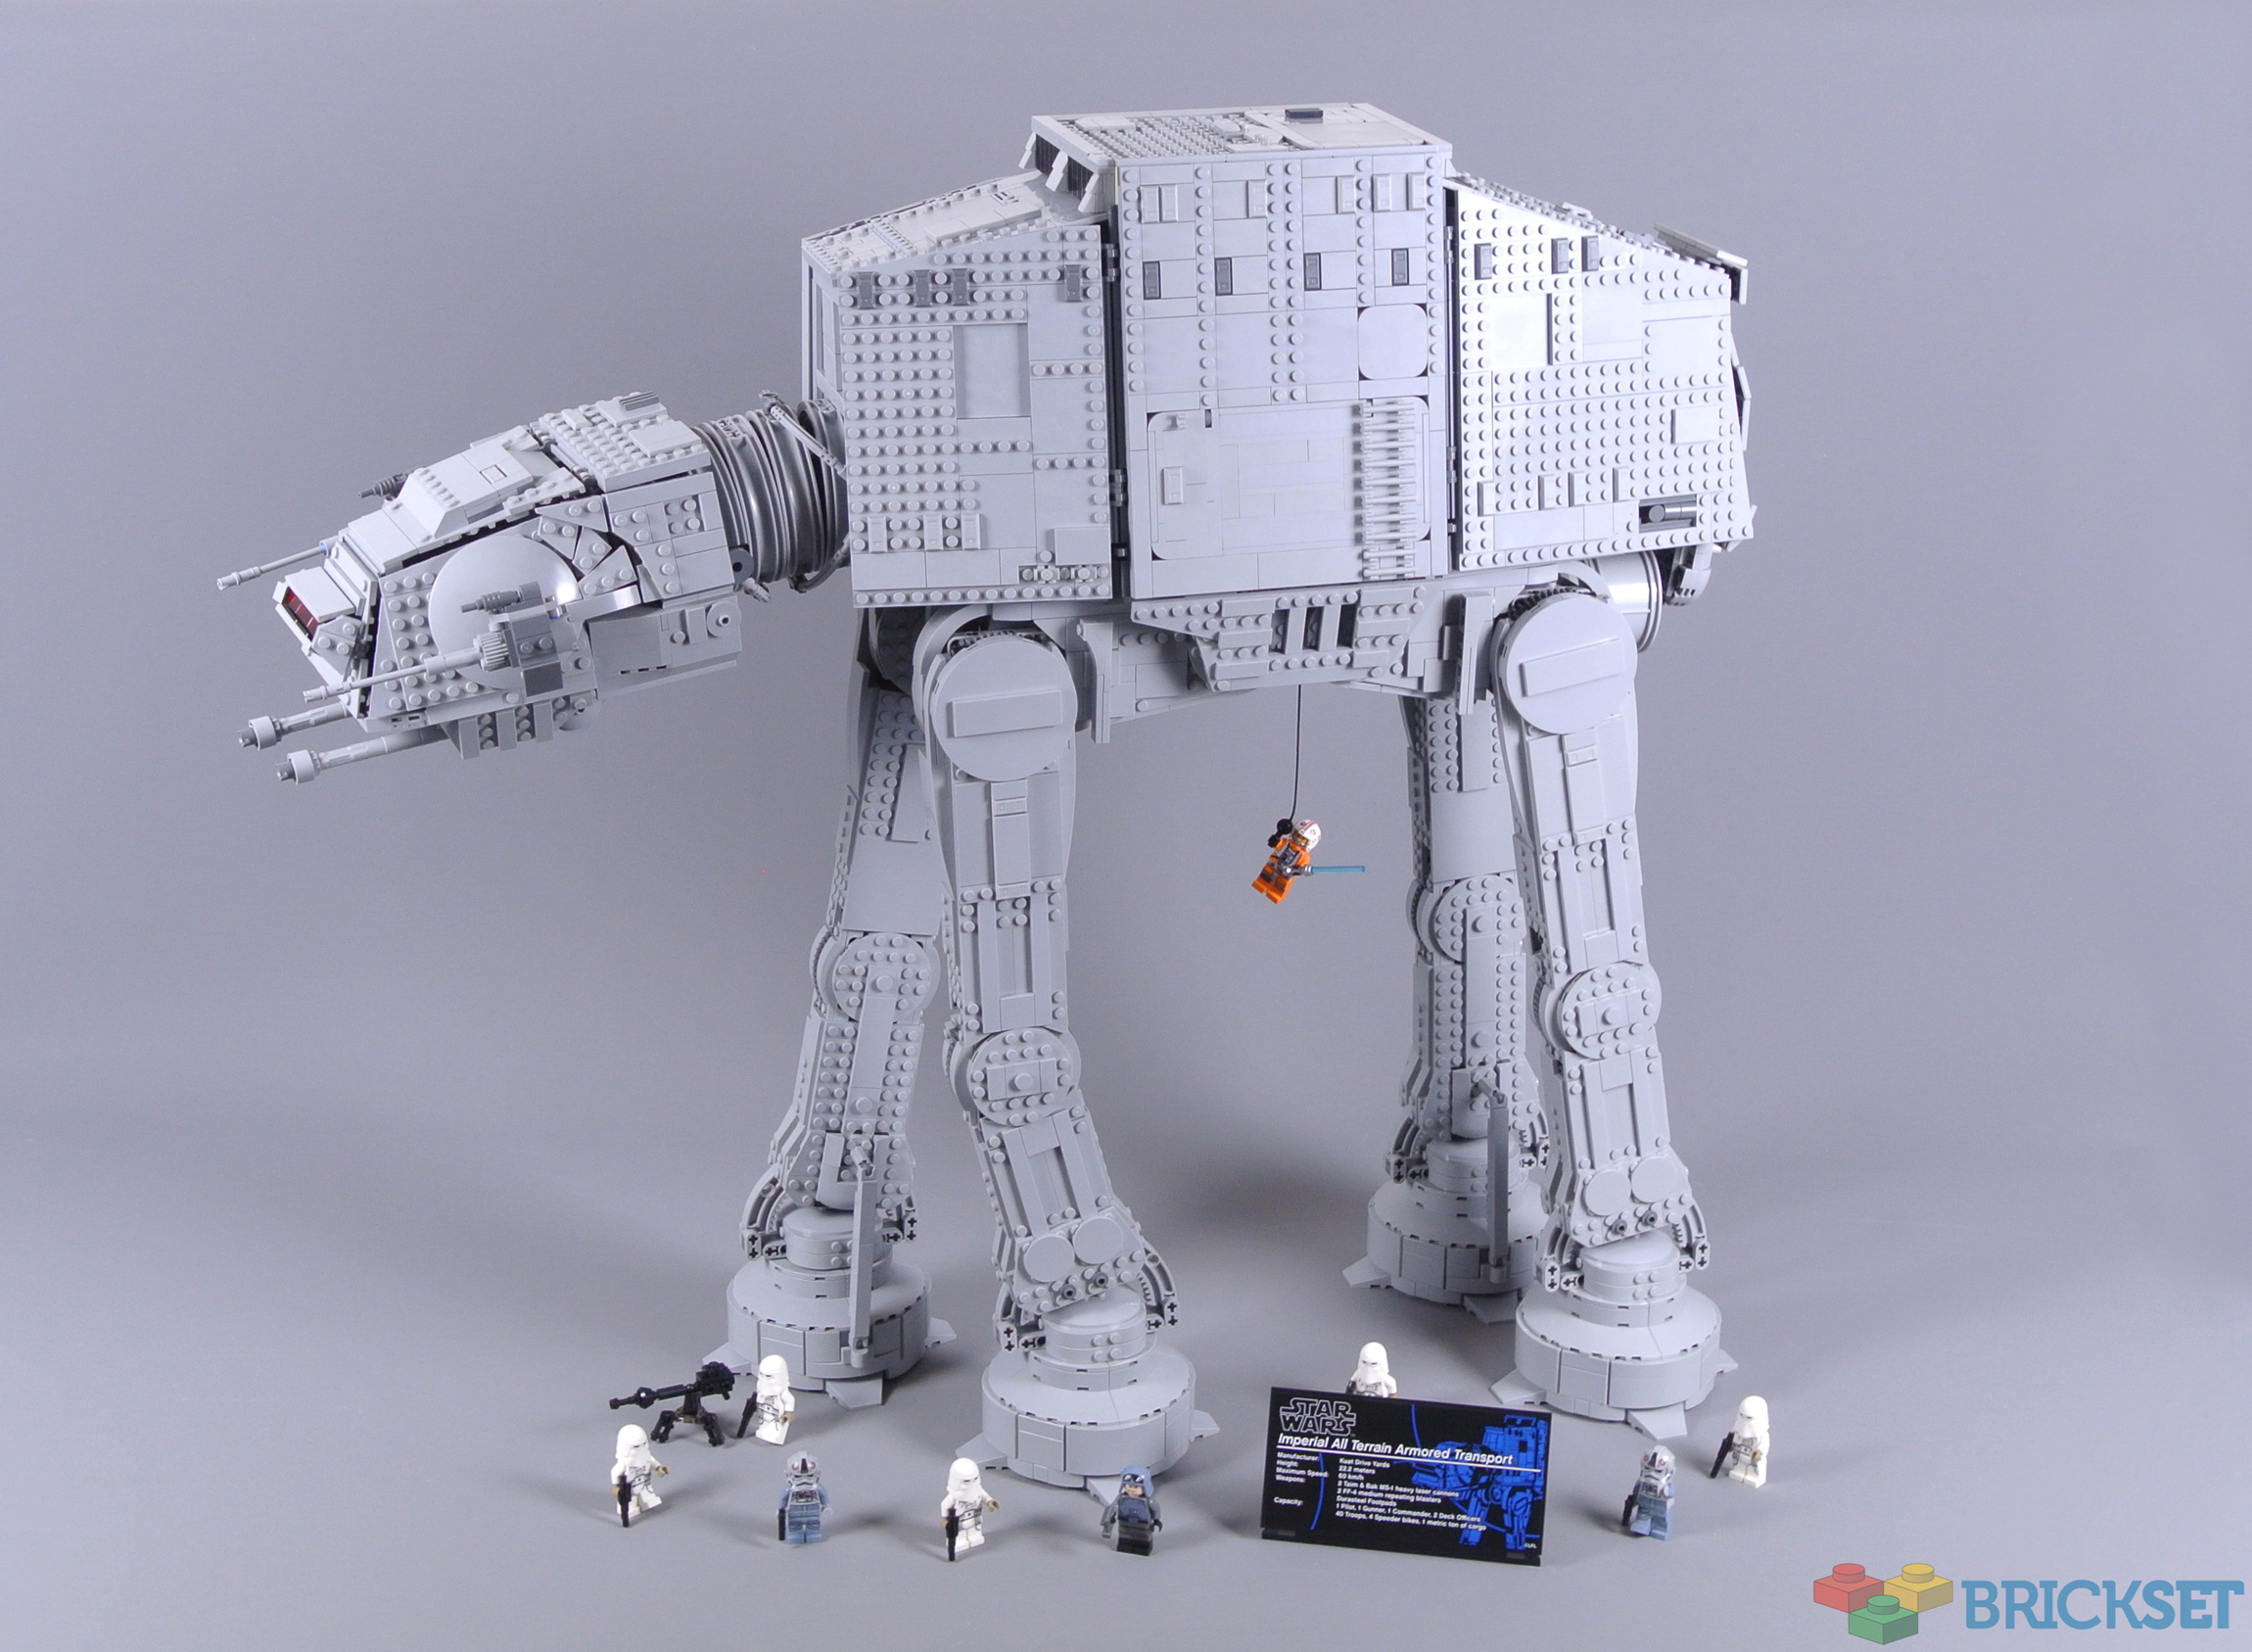 LEGO UCS AT-AT review: Hands-on with the 6,800-piece set - 9to5Toys